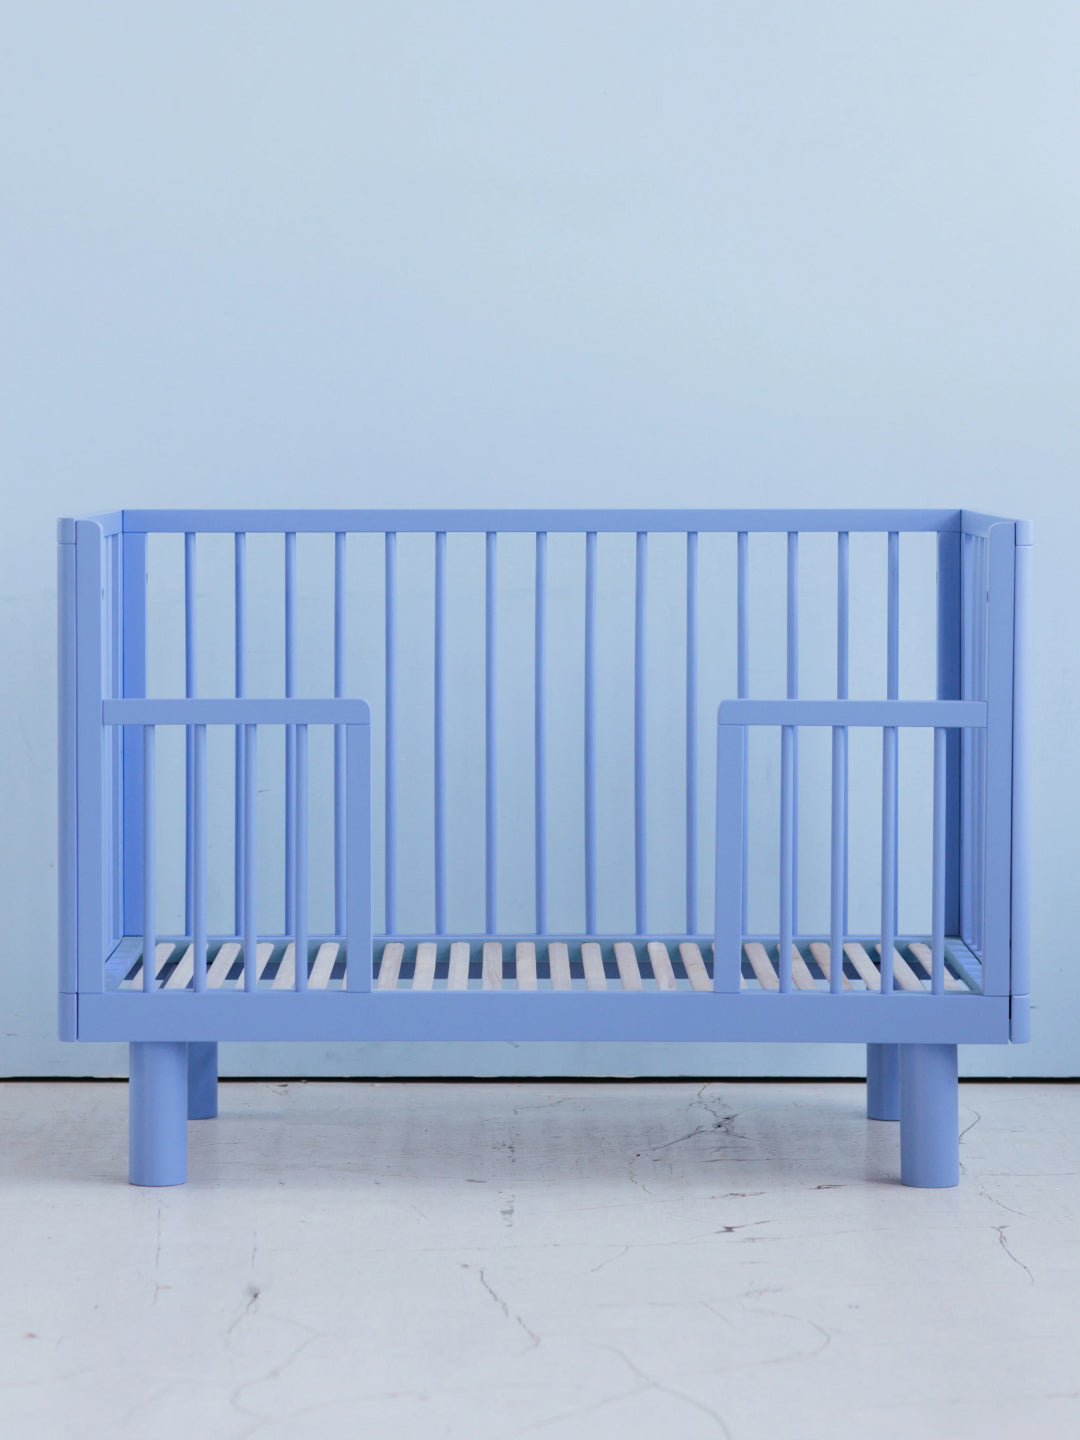 Karl & Fric Nox Cot Junior Conversion Rail, voodipiire, all-groups